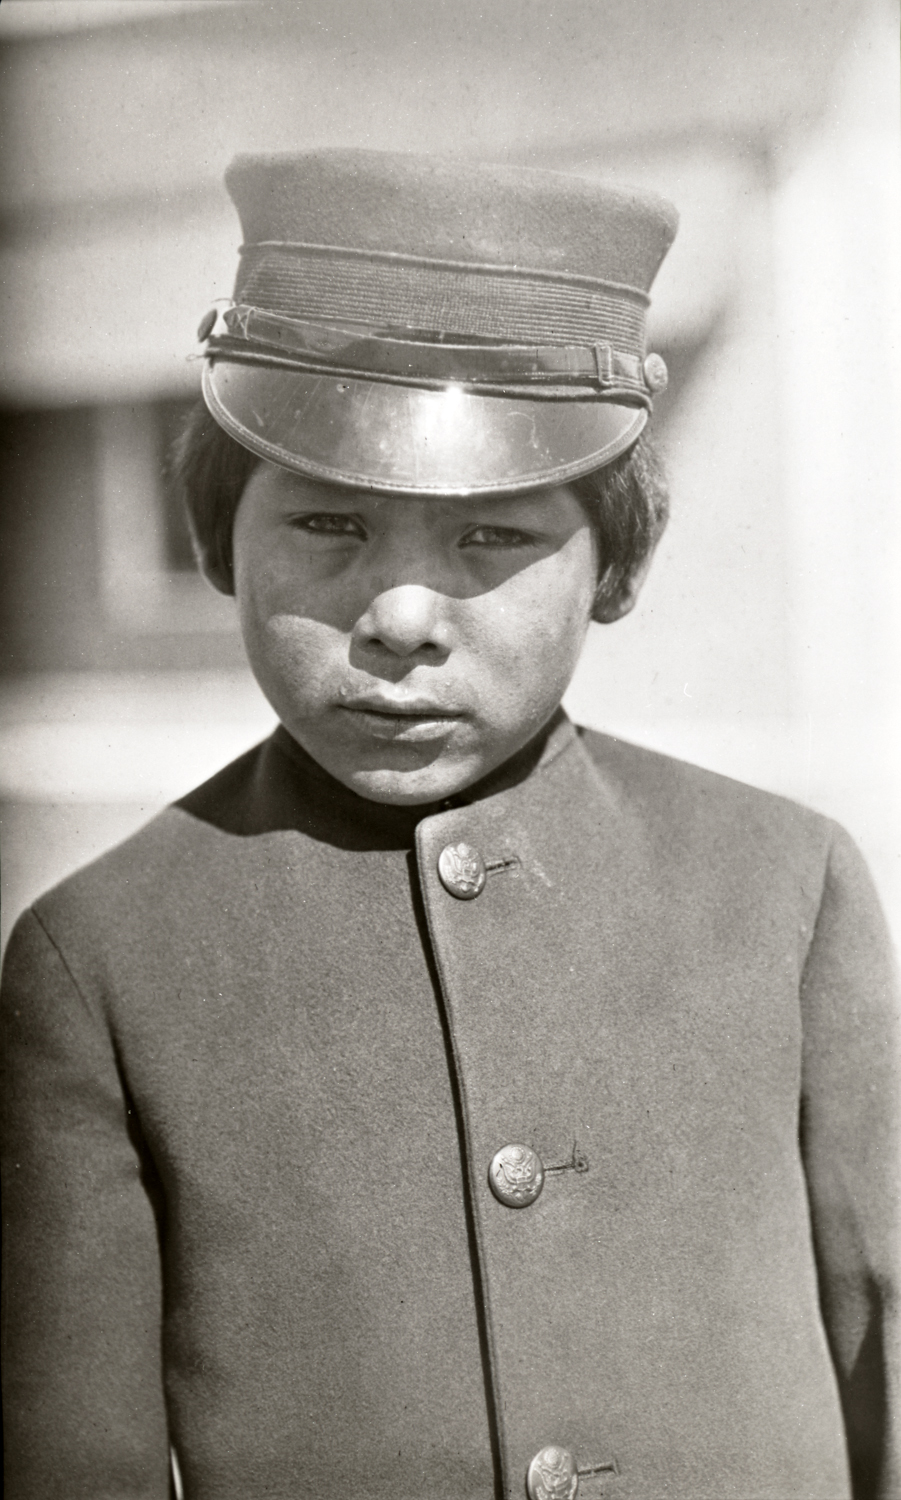 Araphaho or Shoshone Boy, Wind River, Wind River Reservation, Wyoming, October 11, 1913. Photograph by Joseph Dixon. Courtesy of the Mathers Museum of World Cultures, Wanamaker Collection, Indiana University, Bloomington, I.N., W-5516.